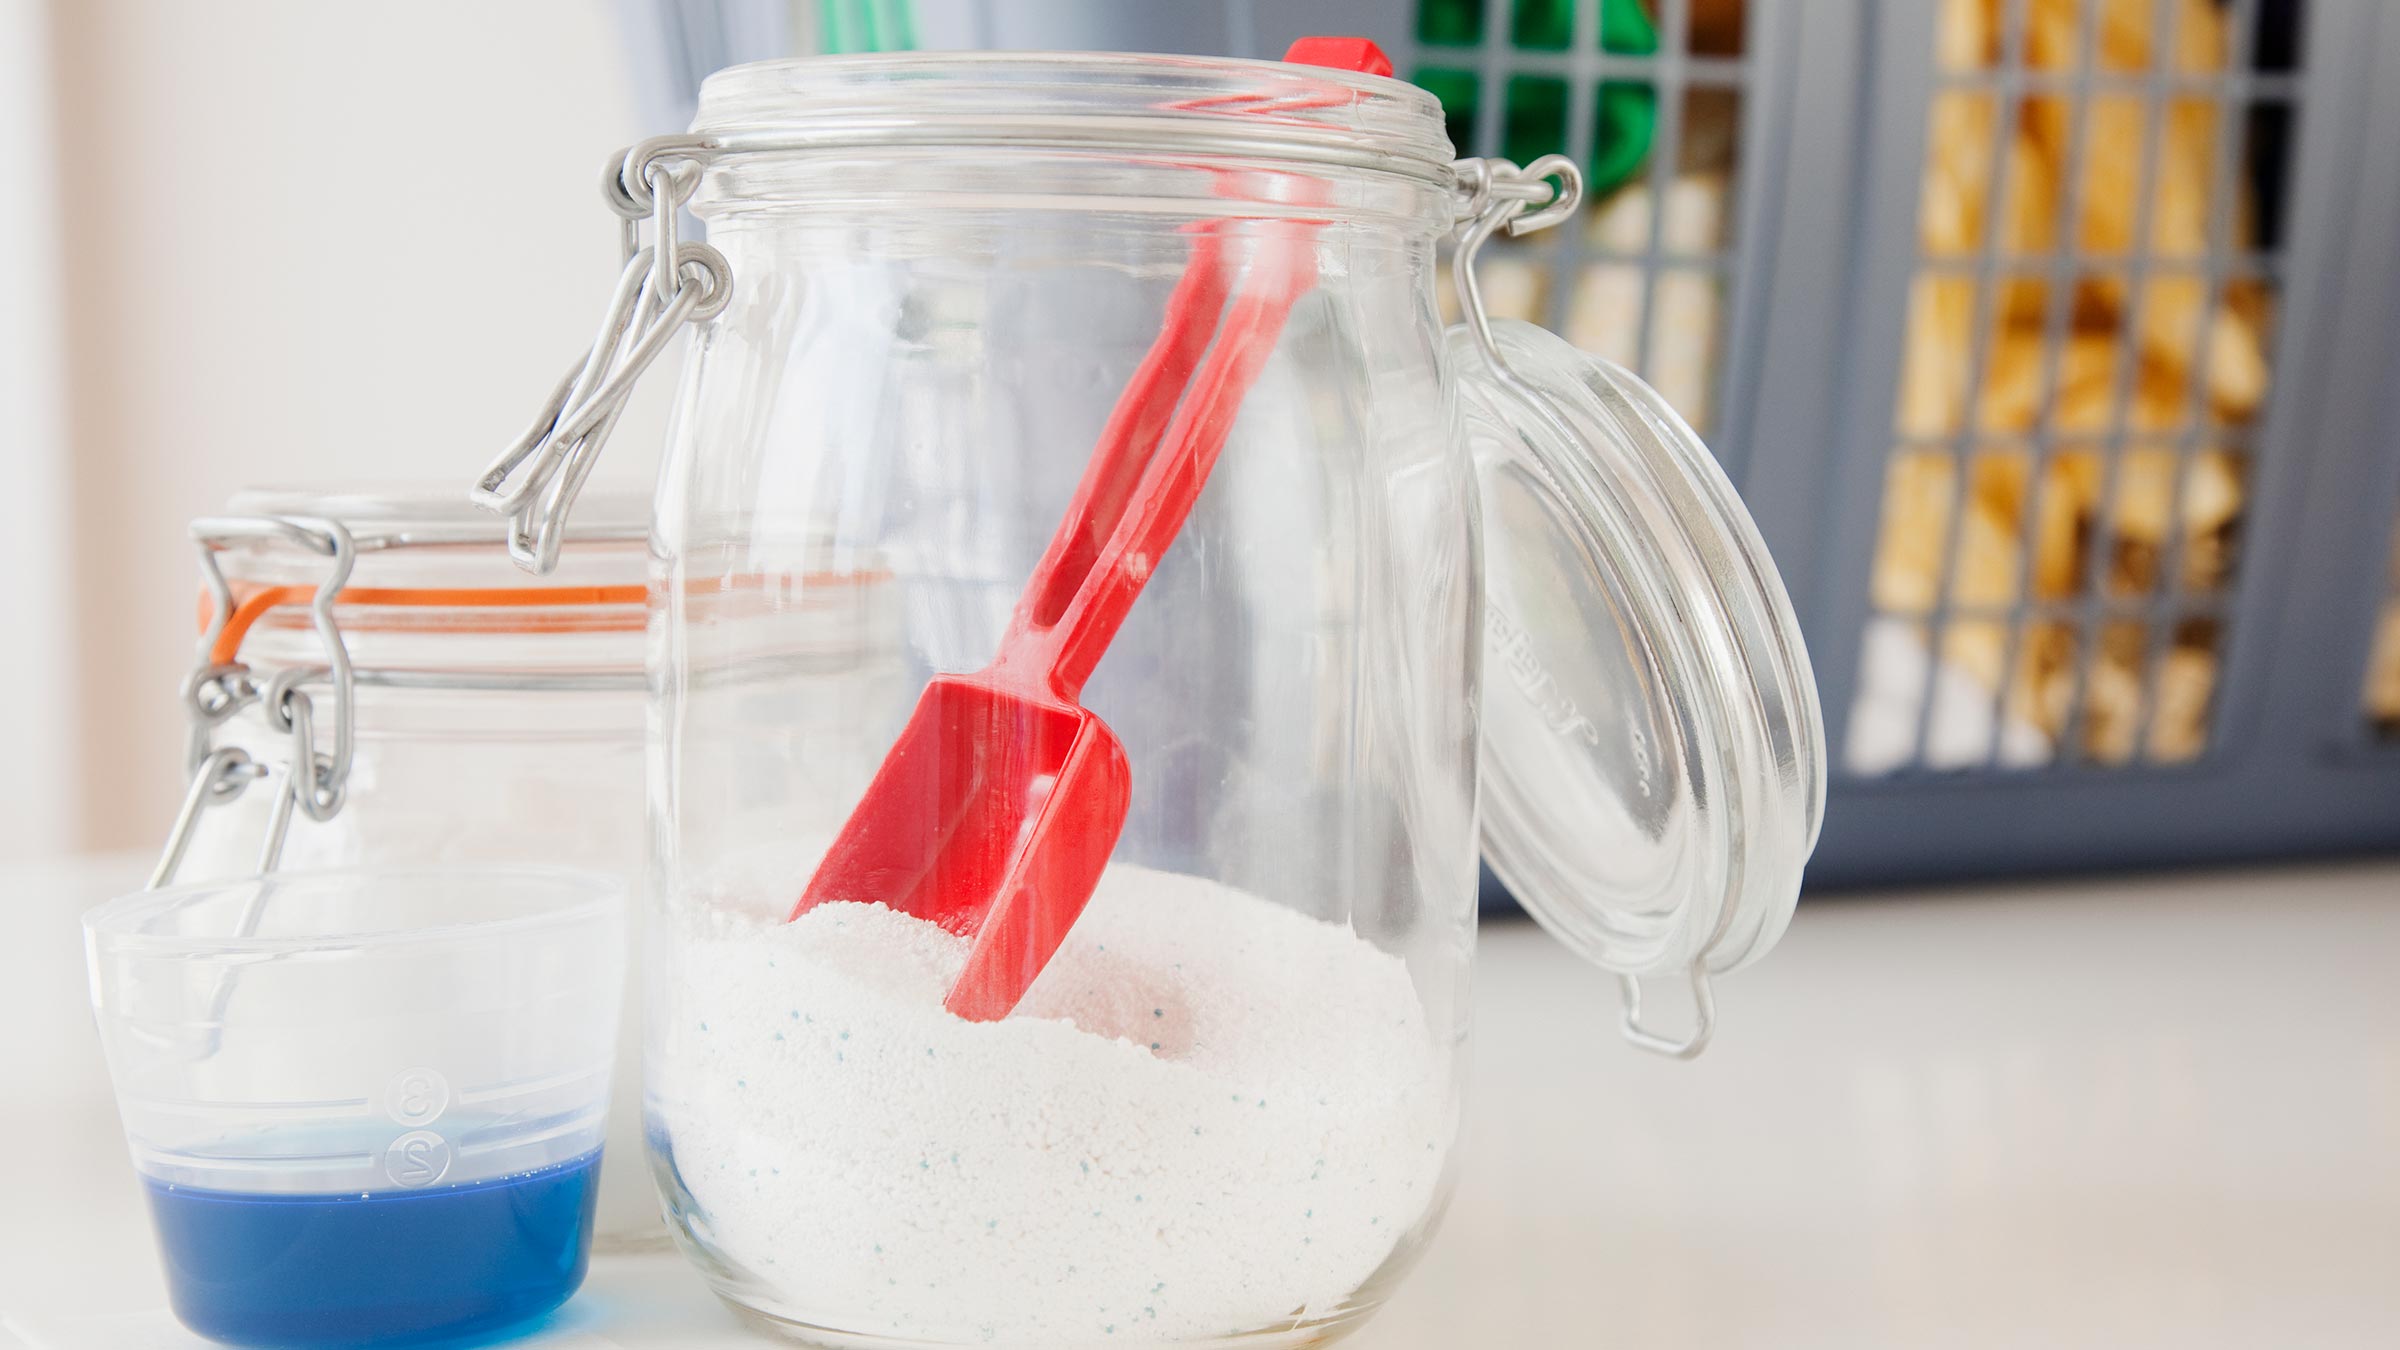 Liquid detergent and borax powder for the laundry